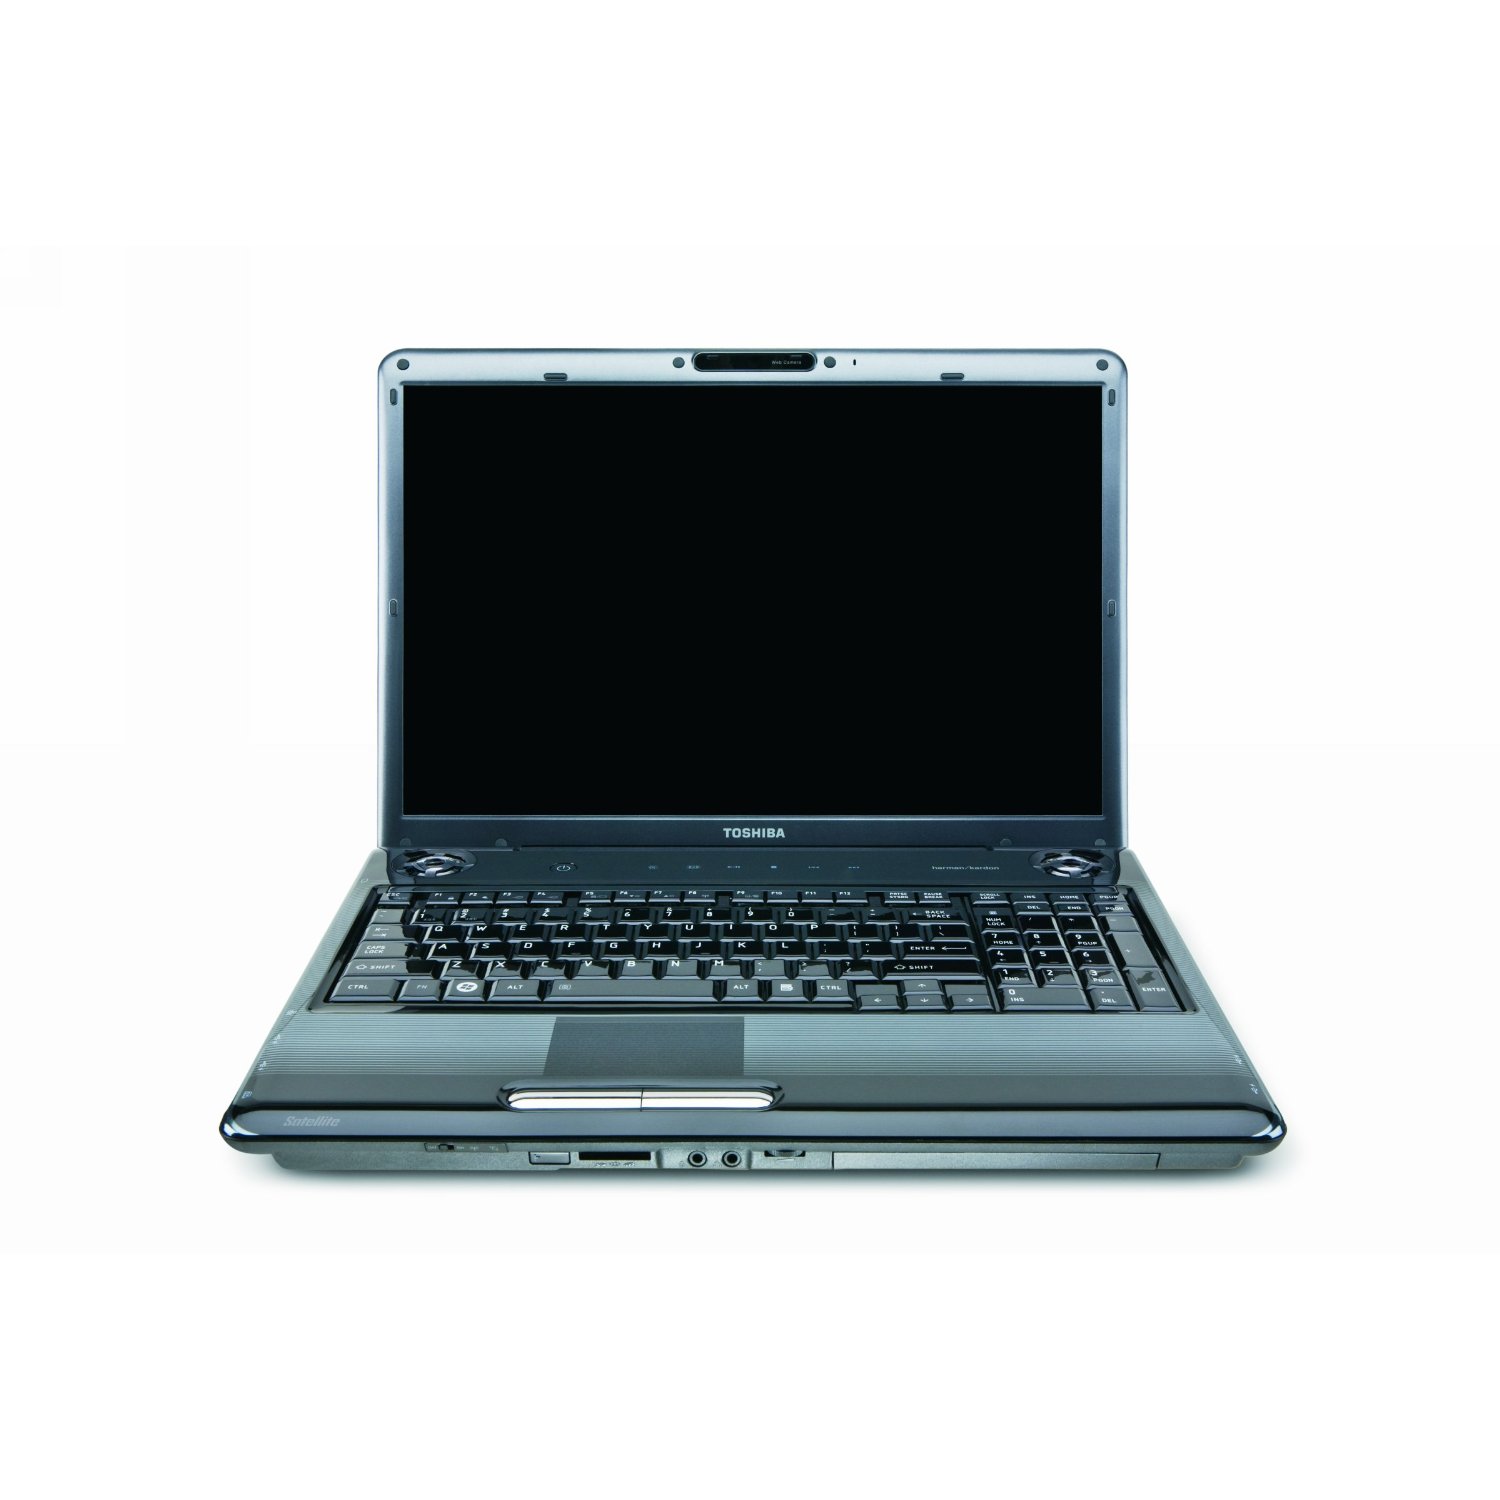 http://thetechjournal.com/wp-content/uploads/images/1111/1320148584-toshiba-satellite-p305s8915-170inch-laptop-5.jpg